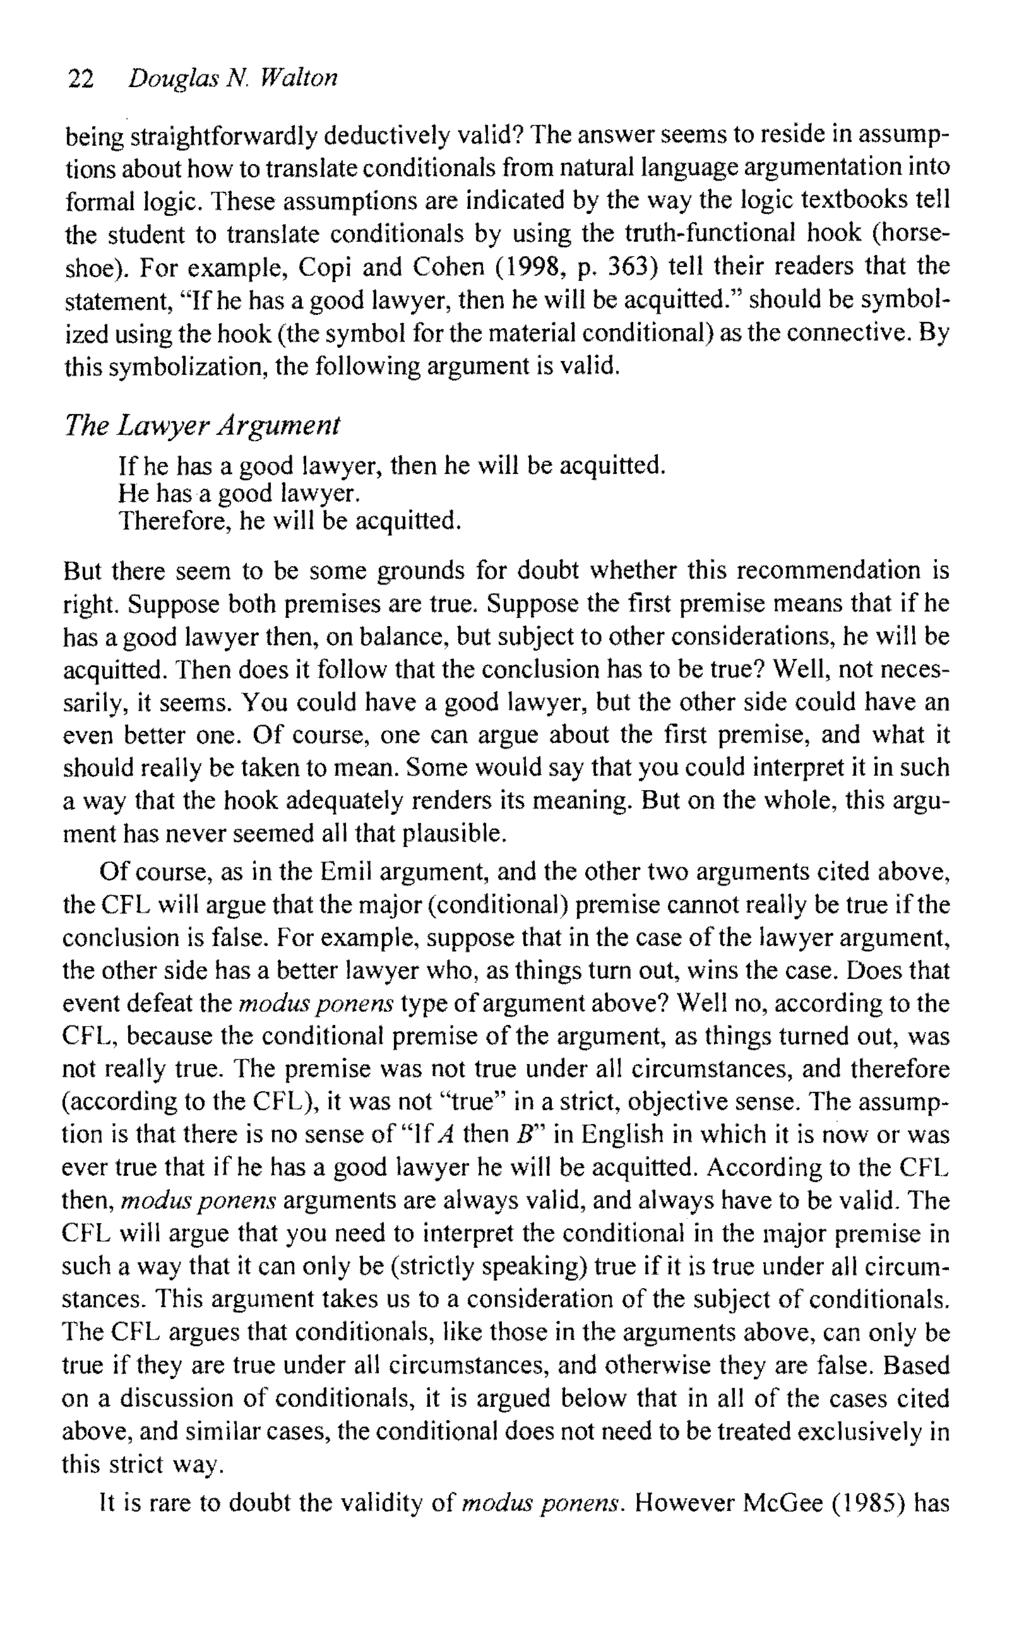 22 Douglas N Walton being straightforwardly deductively valid? The answer seems to reside in assumptions about how to translate conditionals from natural language argumentation into formal logic.